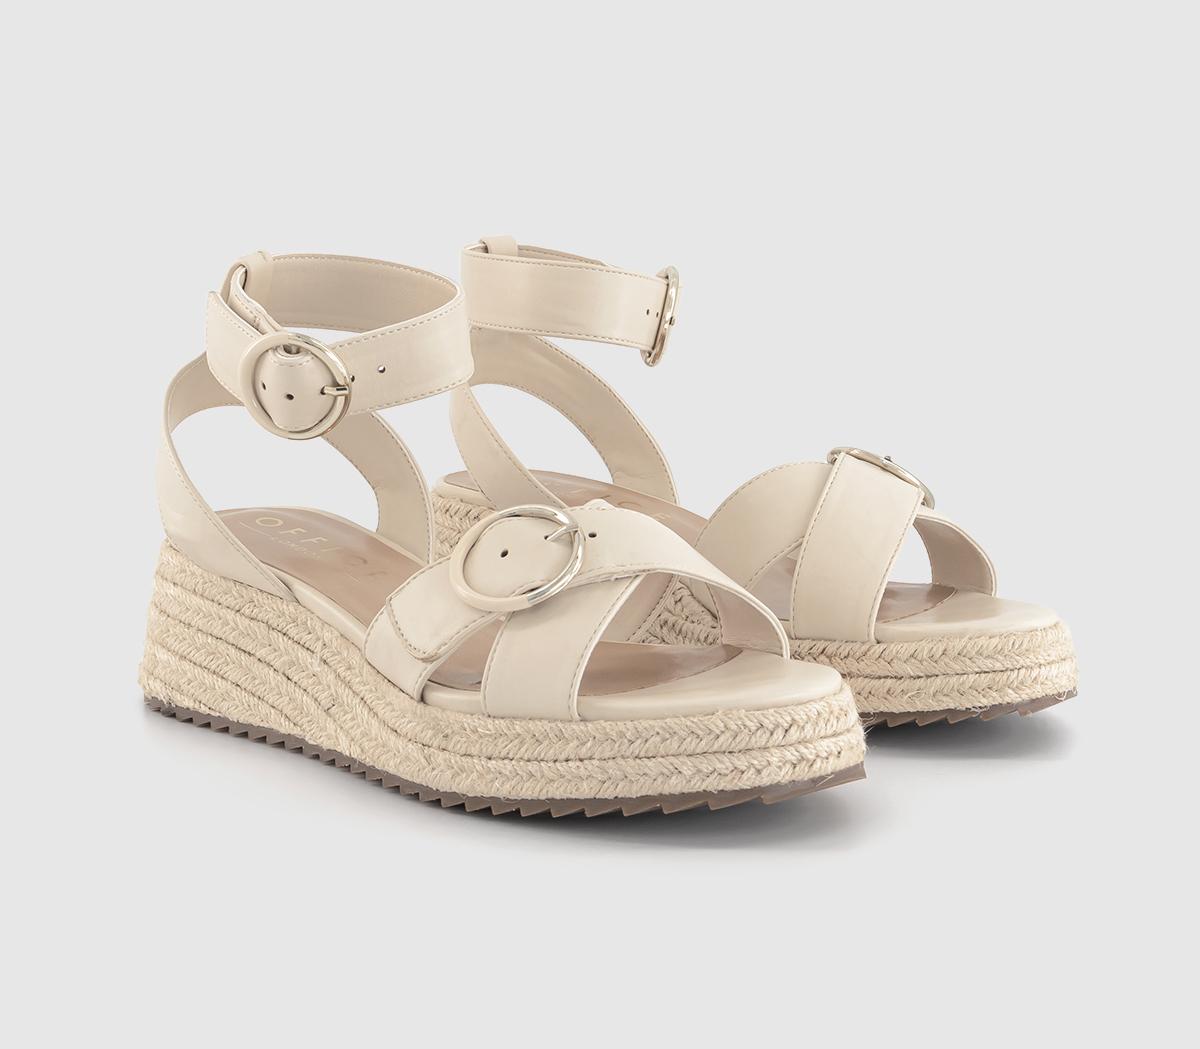 OFFICE Womens Marcella Double Buckle Espadrille Wedges Off White, 8